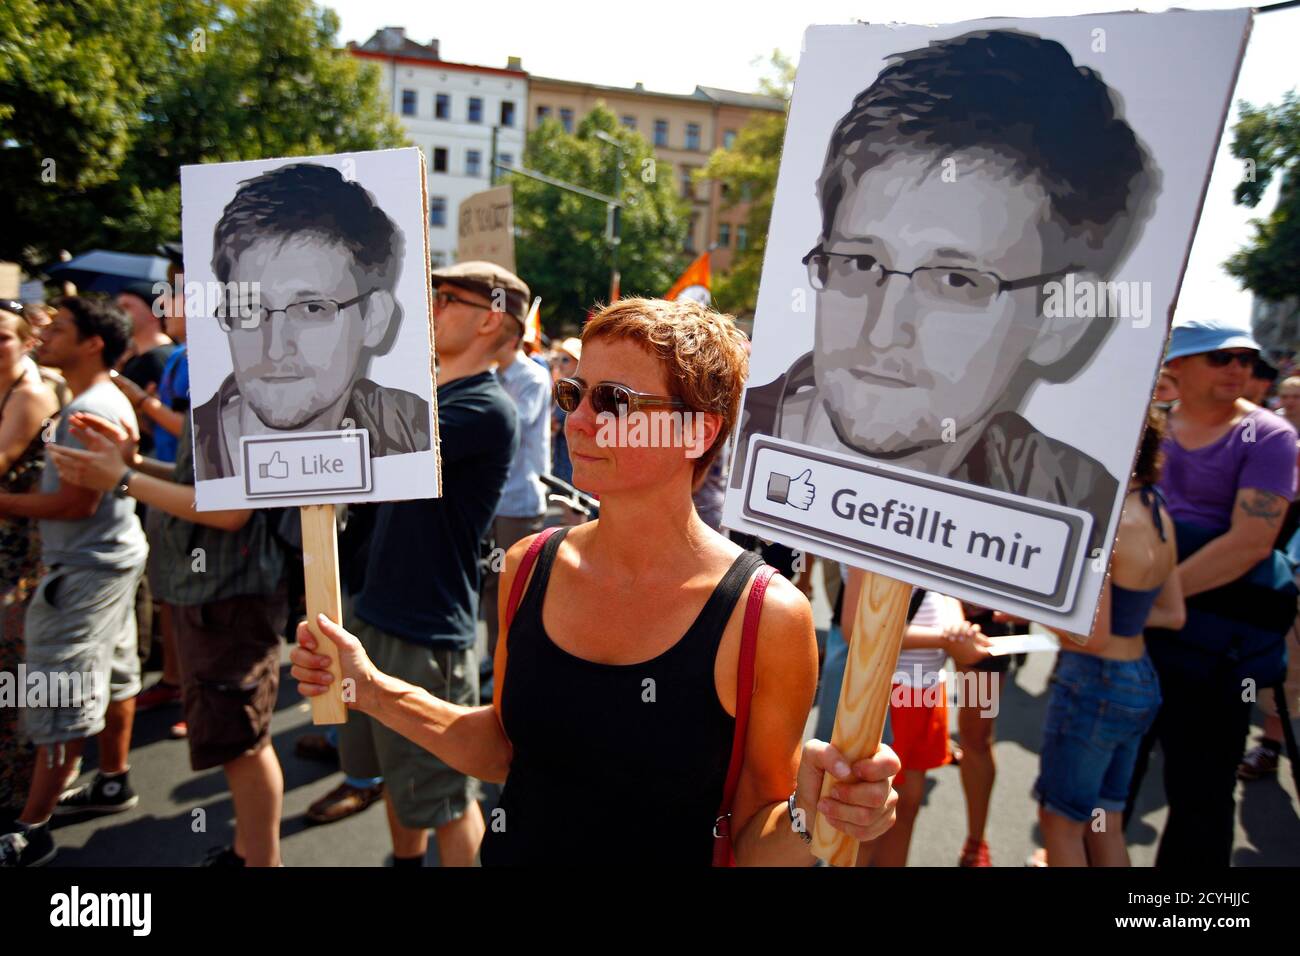 A protester carry two portraits of Edward Snowden during a demonstration against secret monitoring programmes PRISM, TEMPORA, INDECT and showing solidarity with whistleblowers Edward Snowden, Bradley Manning and others in Berlin July 27, 2013. REUTERS/Pawel Kopczynski (GERMANY  - Tags: CIVIL UNREST) Stock Photo